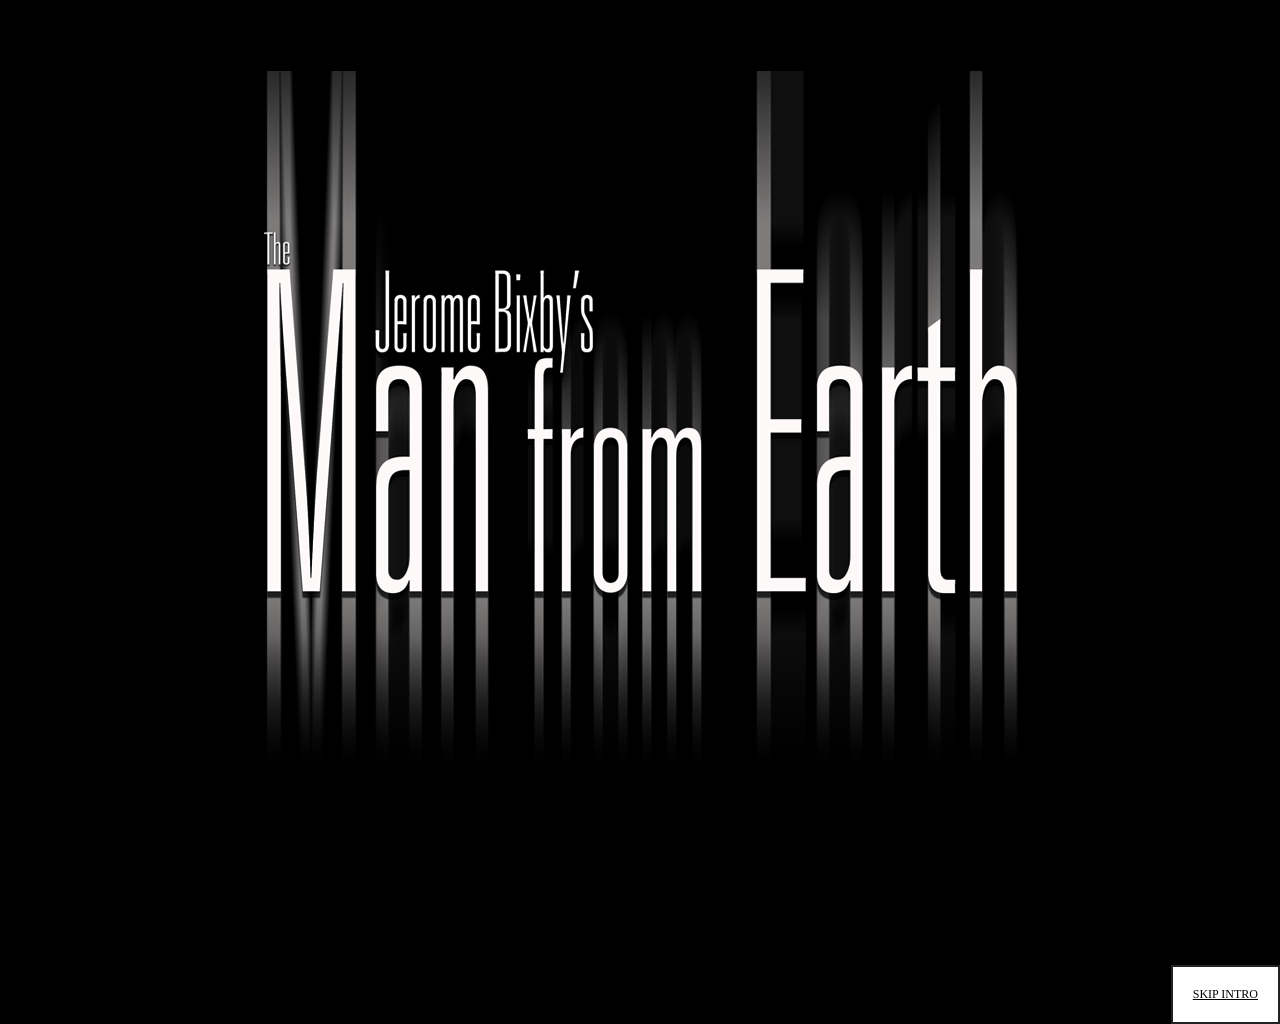 manfromearth.com